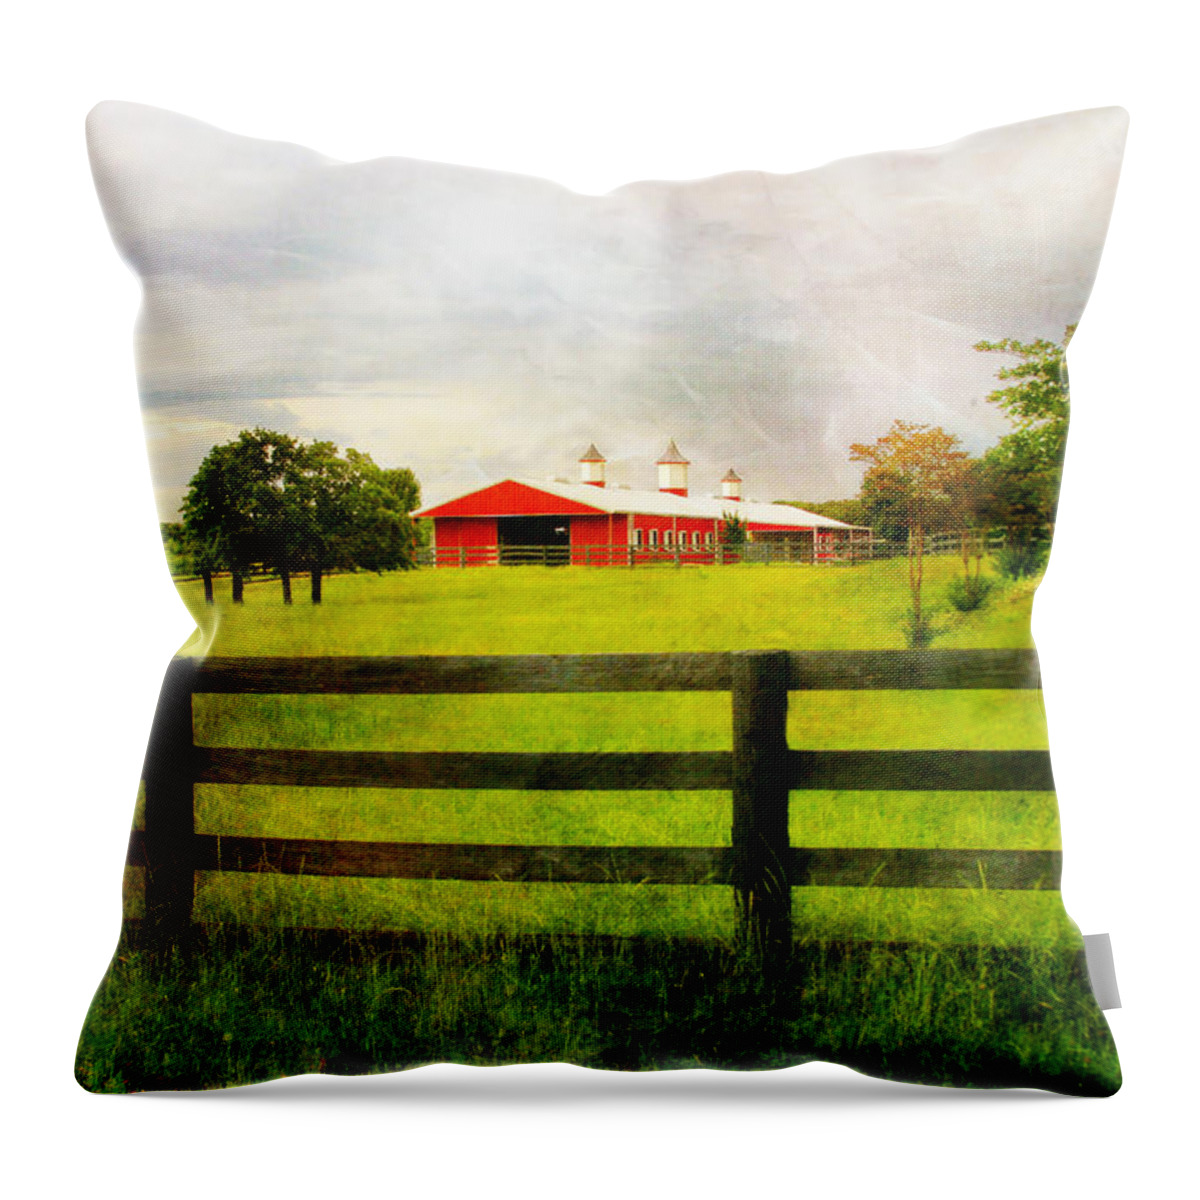 Barn Throw Pillow featuring the photograph Red Horse Barn by Joan Bertucci